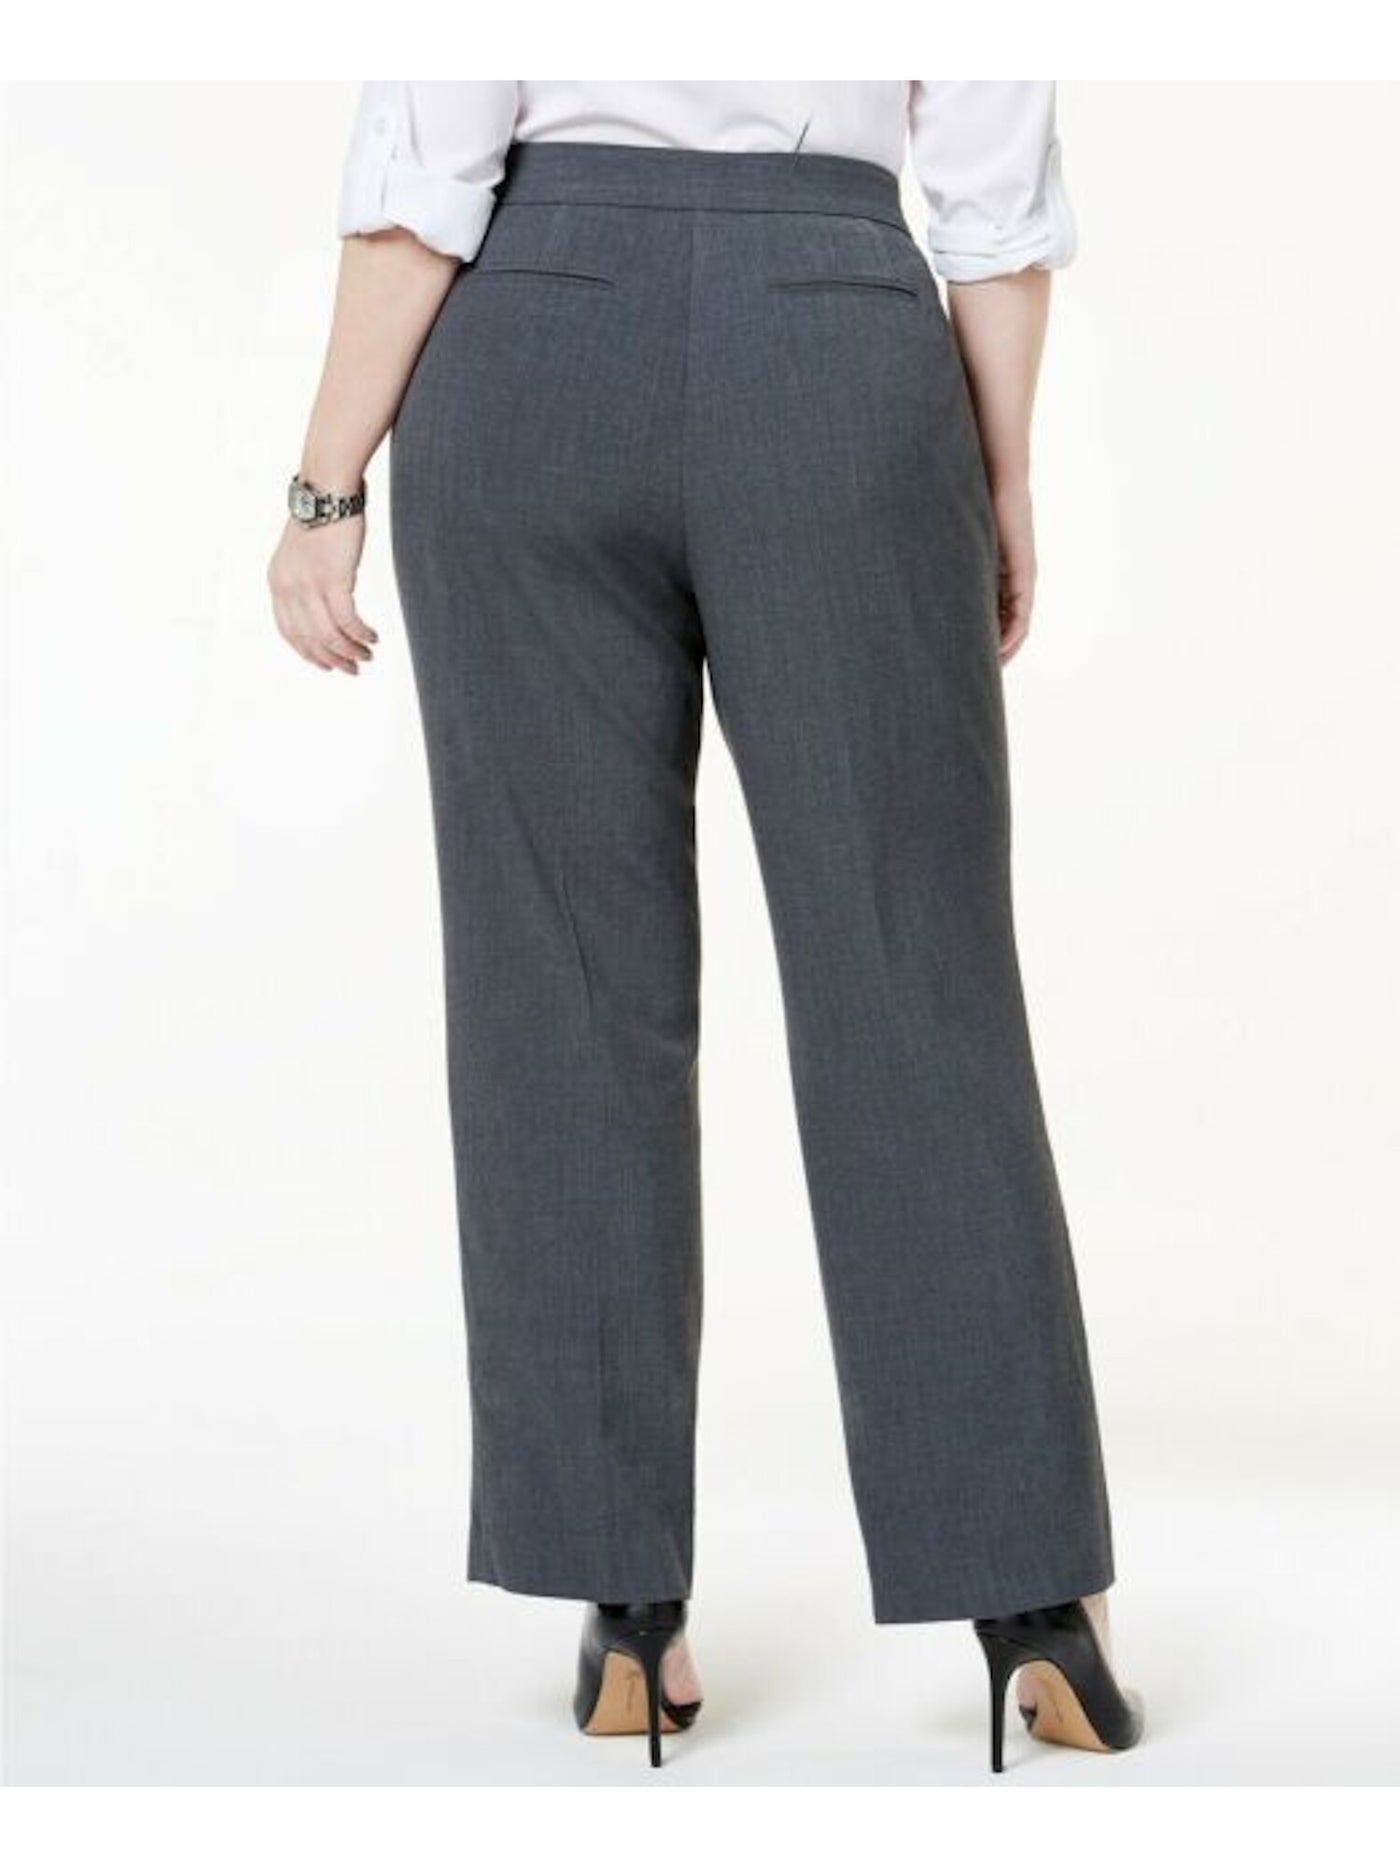 JM COLLECTION Womens Wear To Work Boot Cut Pants